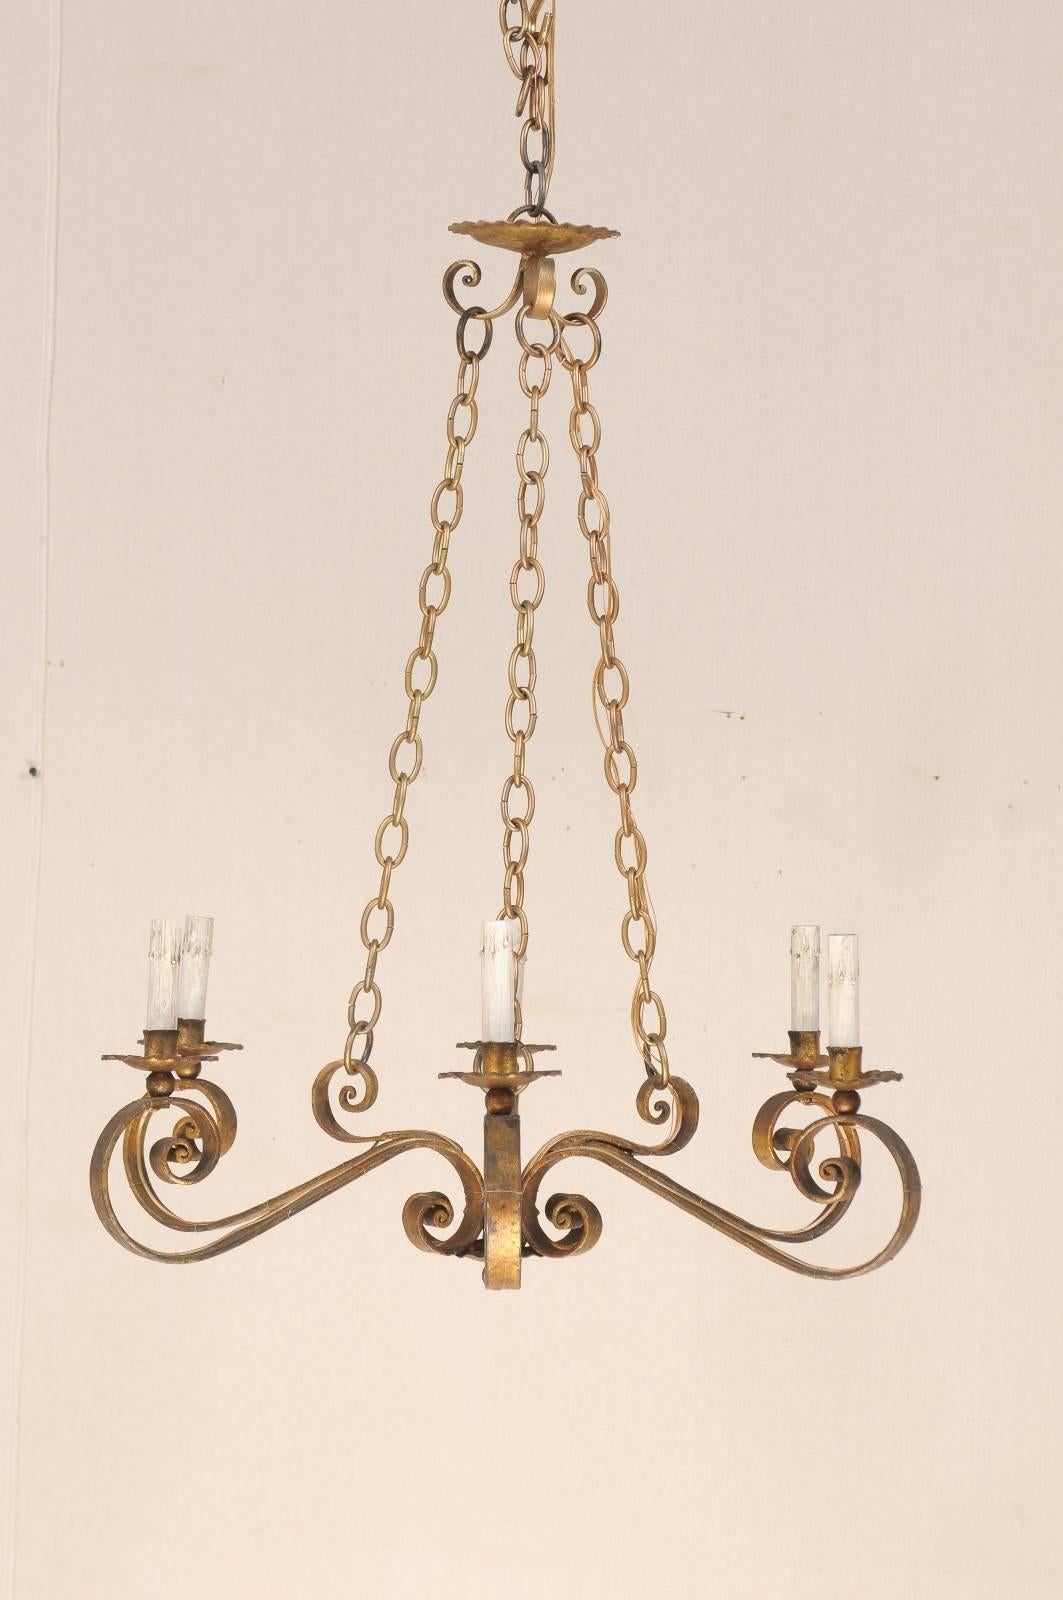 A Spanish 19th century gilded iron six-light chandelier. This Spanish chandelier from the mid-19th century features six scrolled arms connected at centre that span out to create a circular shape and support the bobèches and painted candle sleeves.